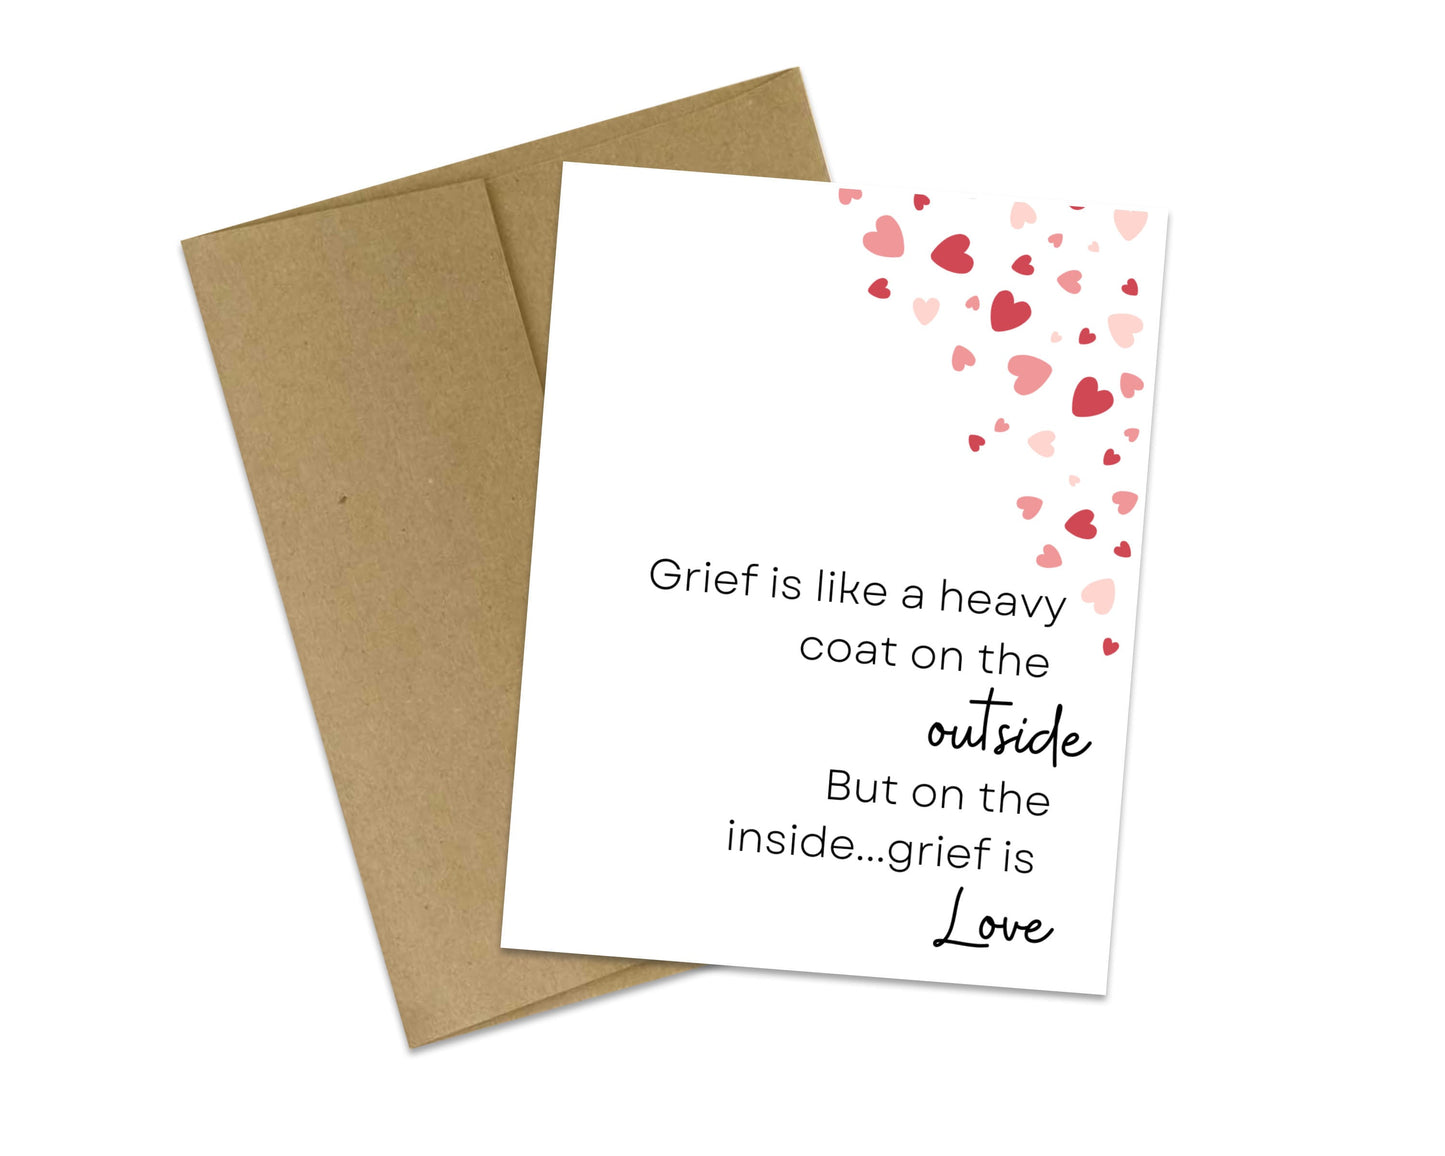 Grief is like a heavy coat on the outside - But on the inside, grief is Love